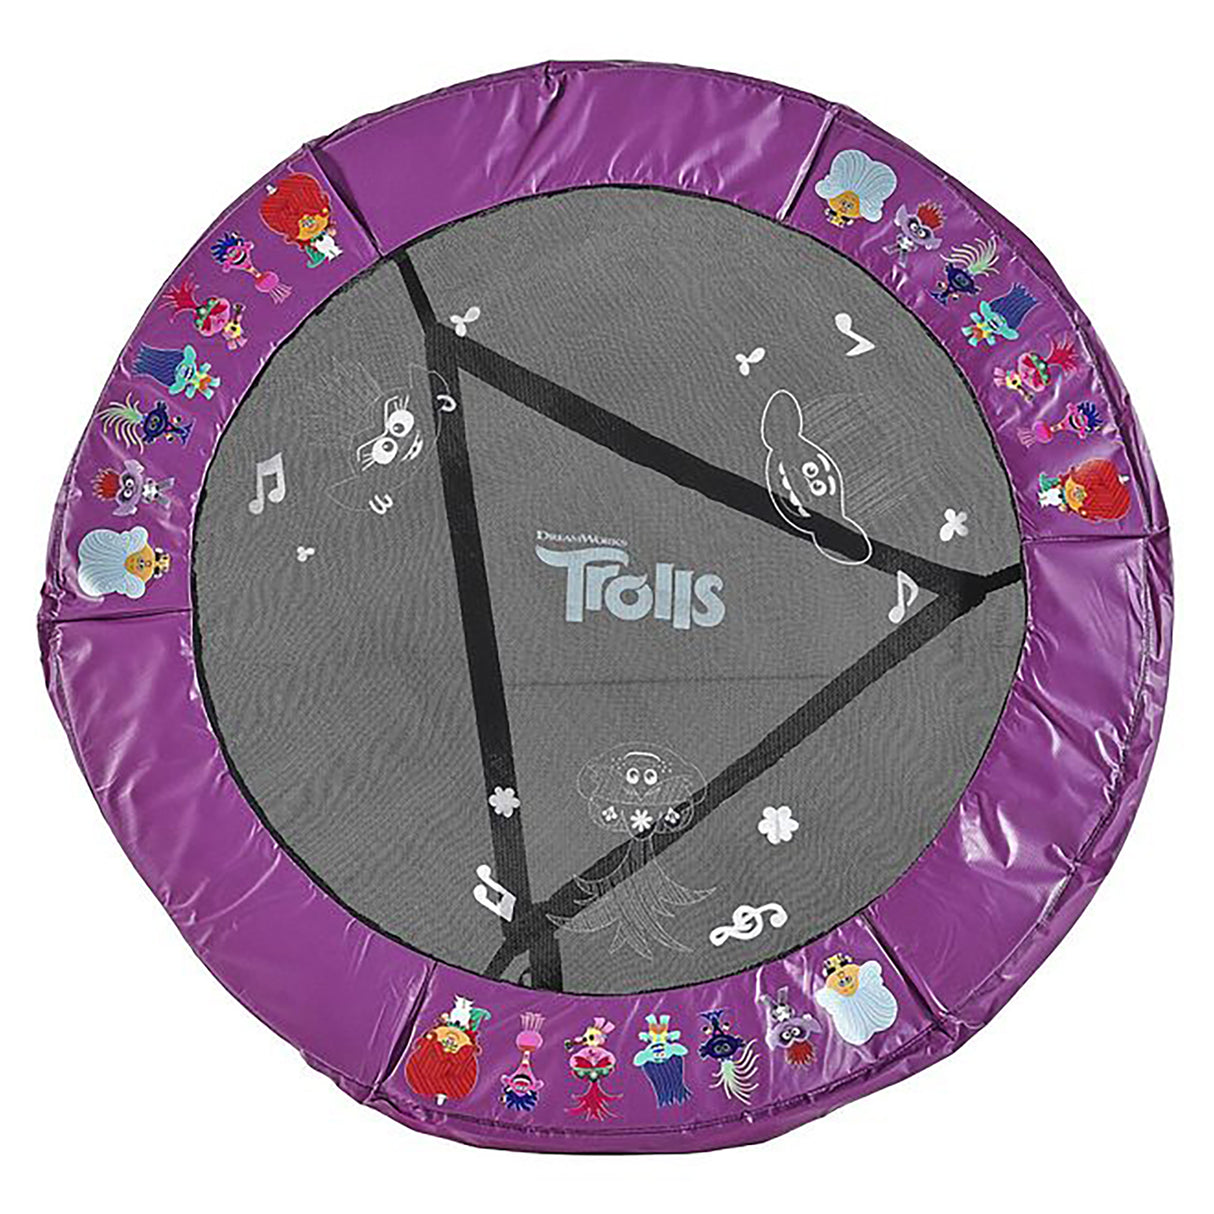 Plum Trolls Theme Junior Trampoline and Enclosure with Sound Box Feature (4.5 ft)